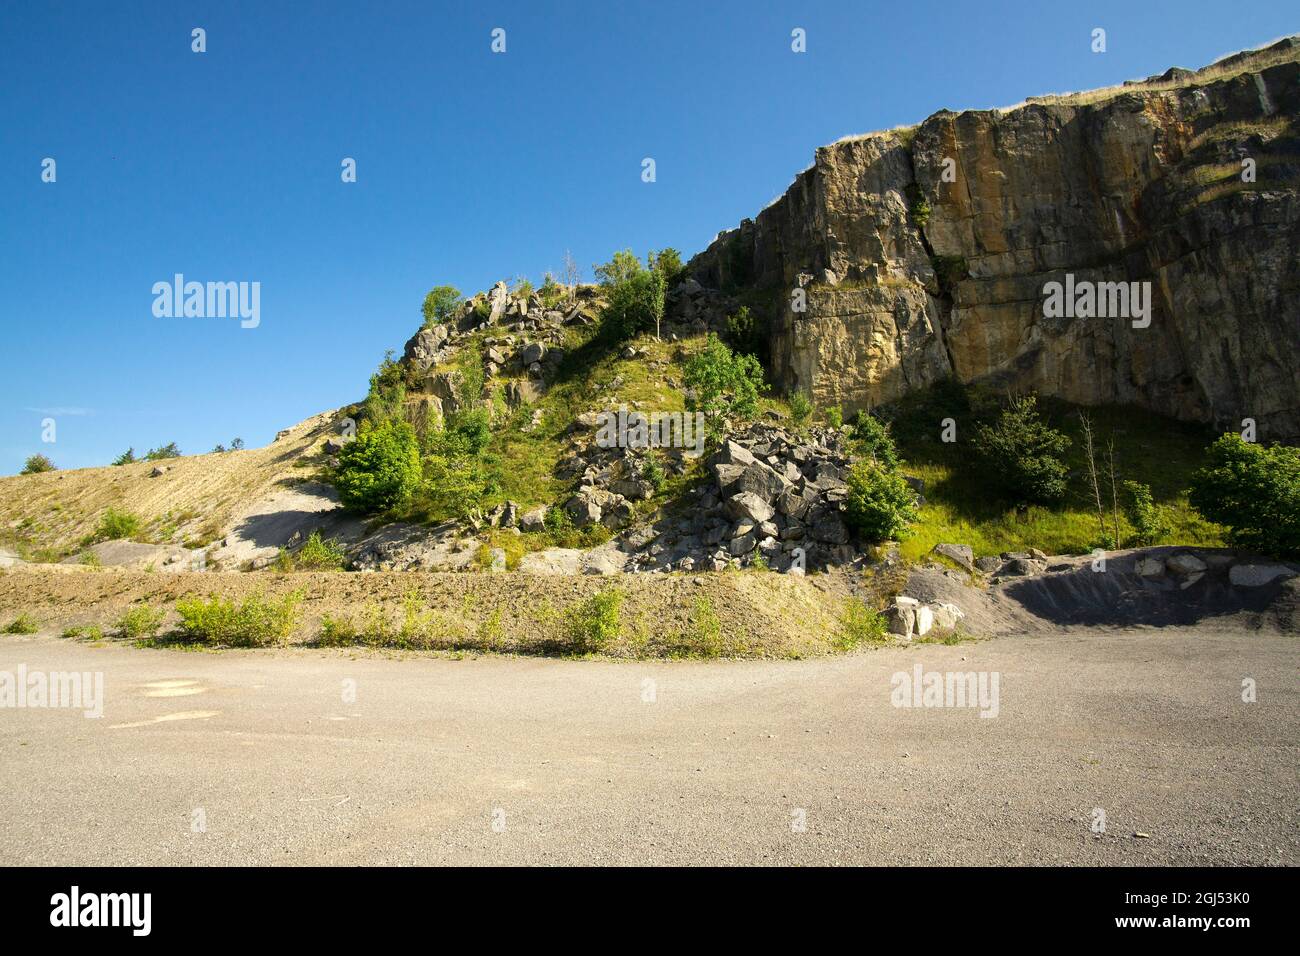 Abandoned quarry rock face in Crich, Derbyshire, UK Stock Photo